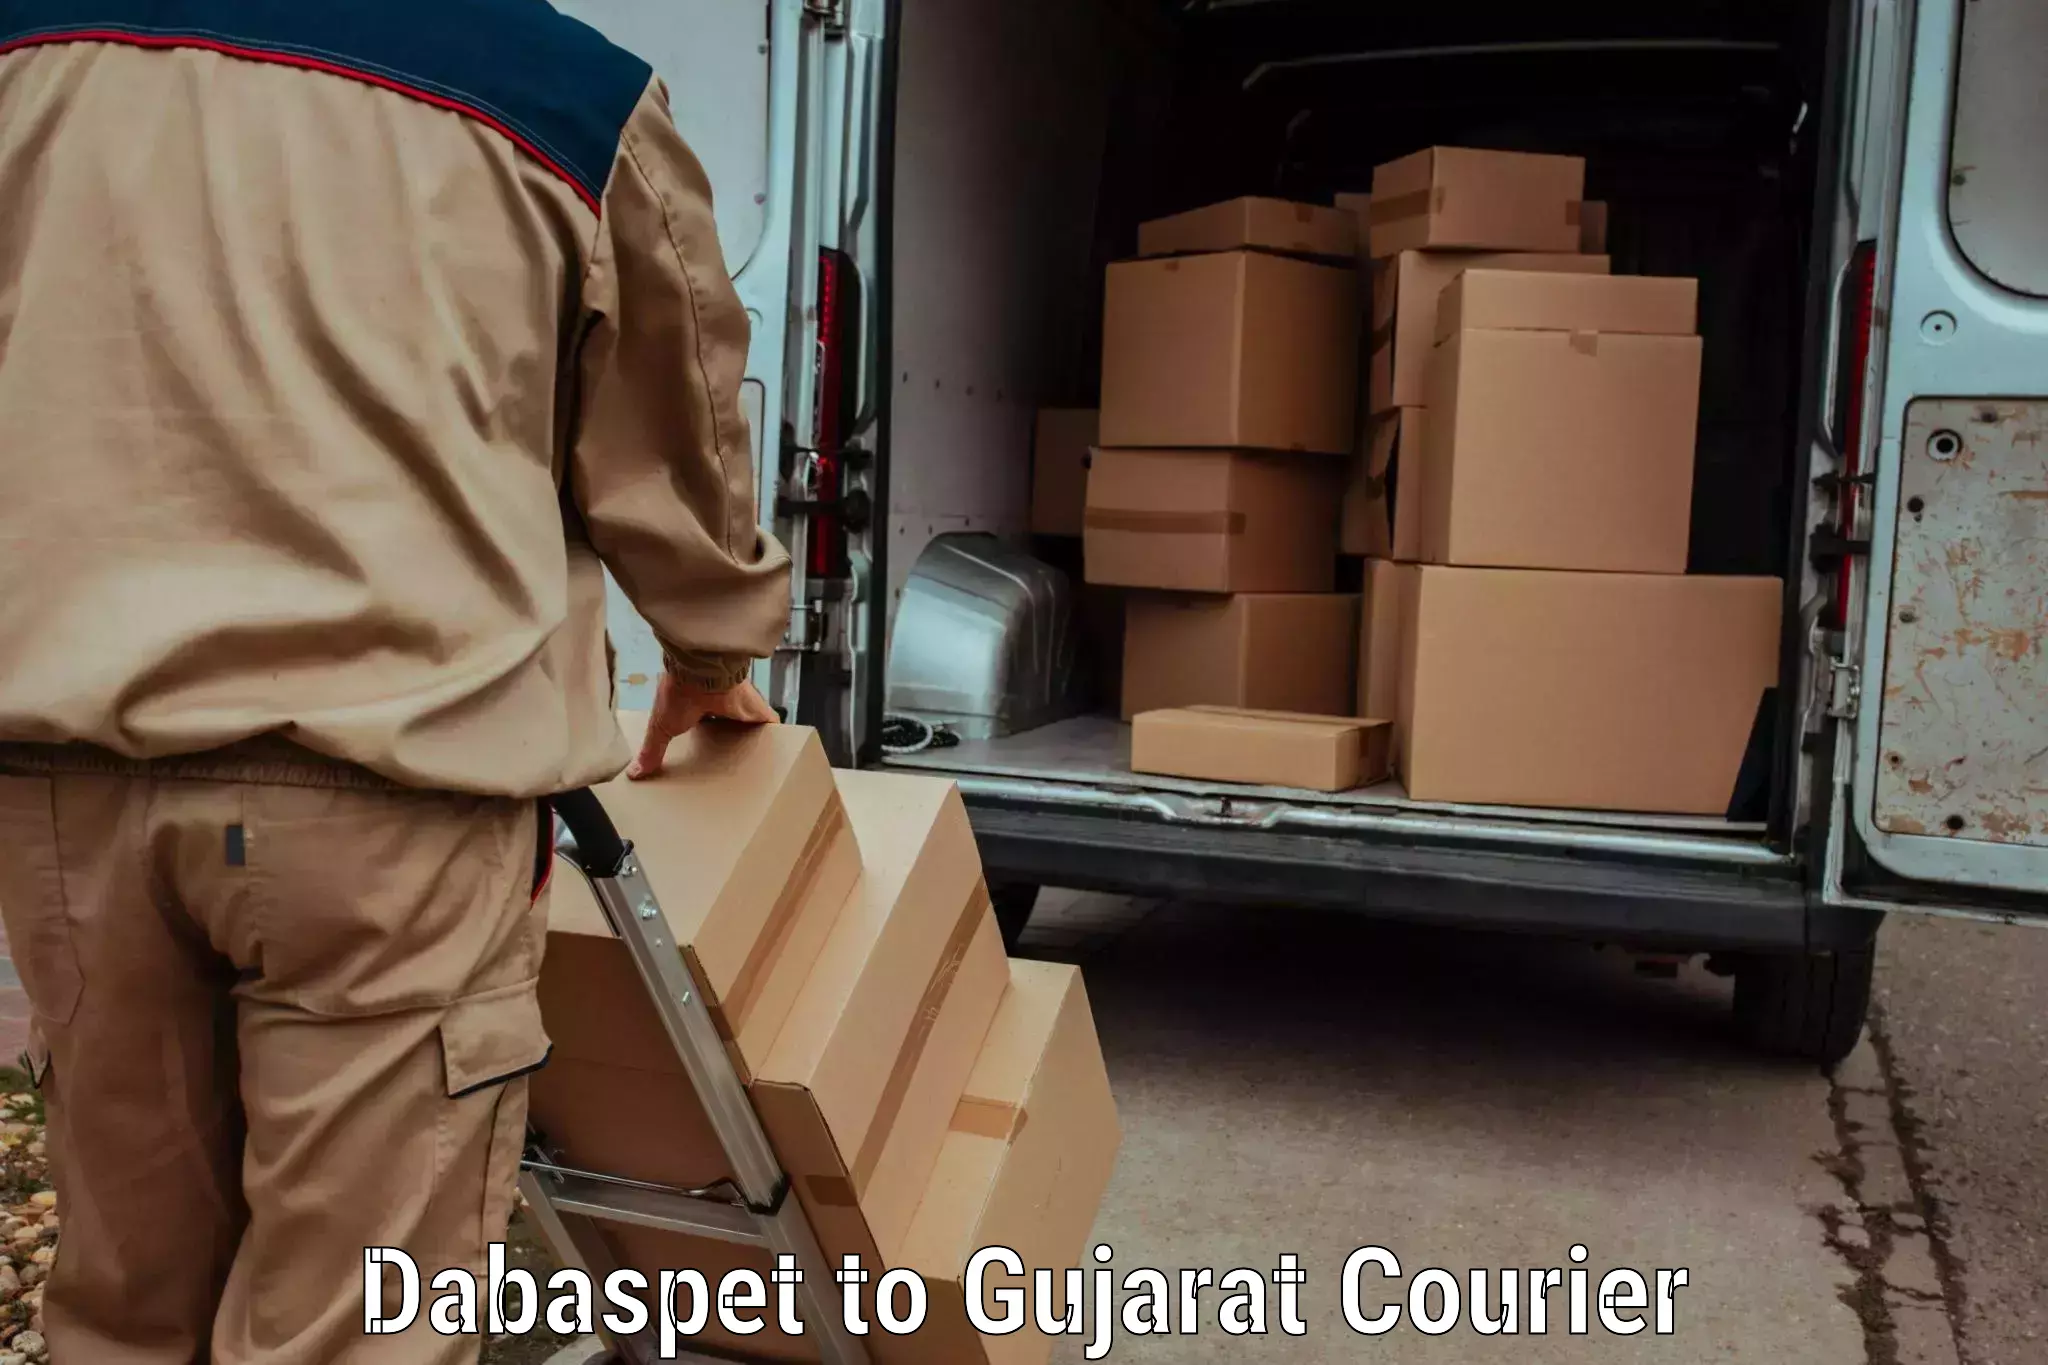 Global courier networks Dabaspet to Tharad